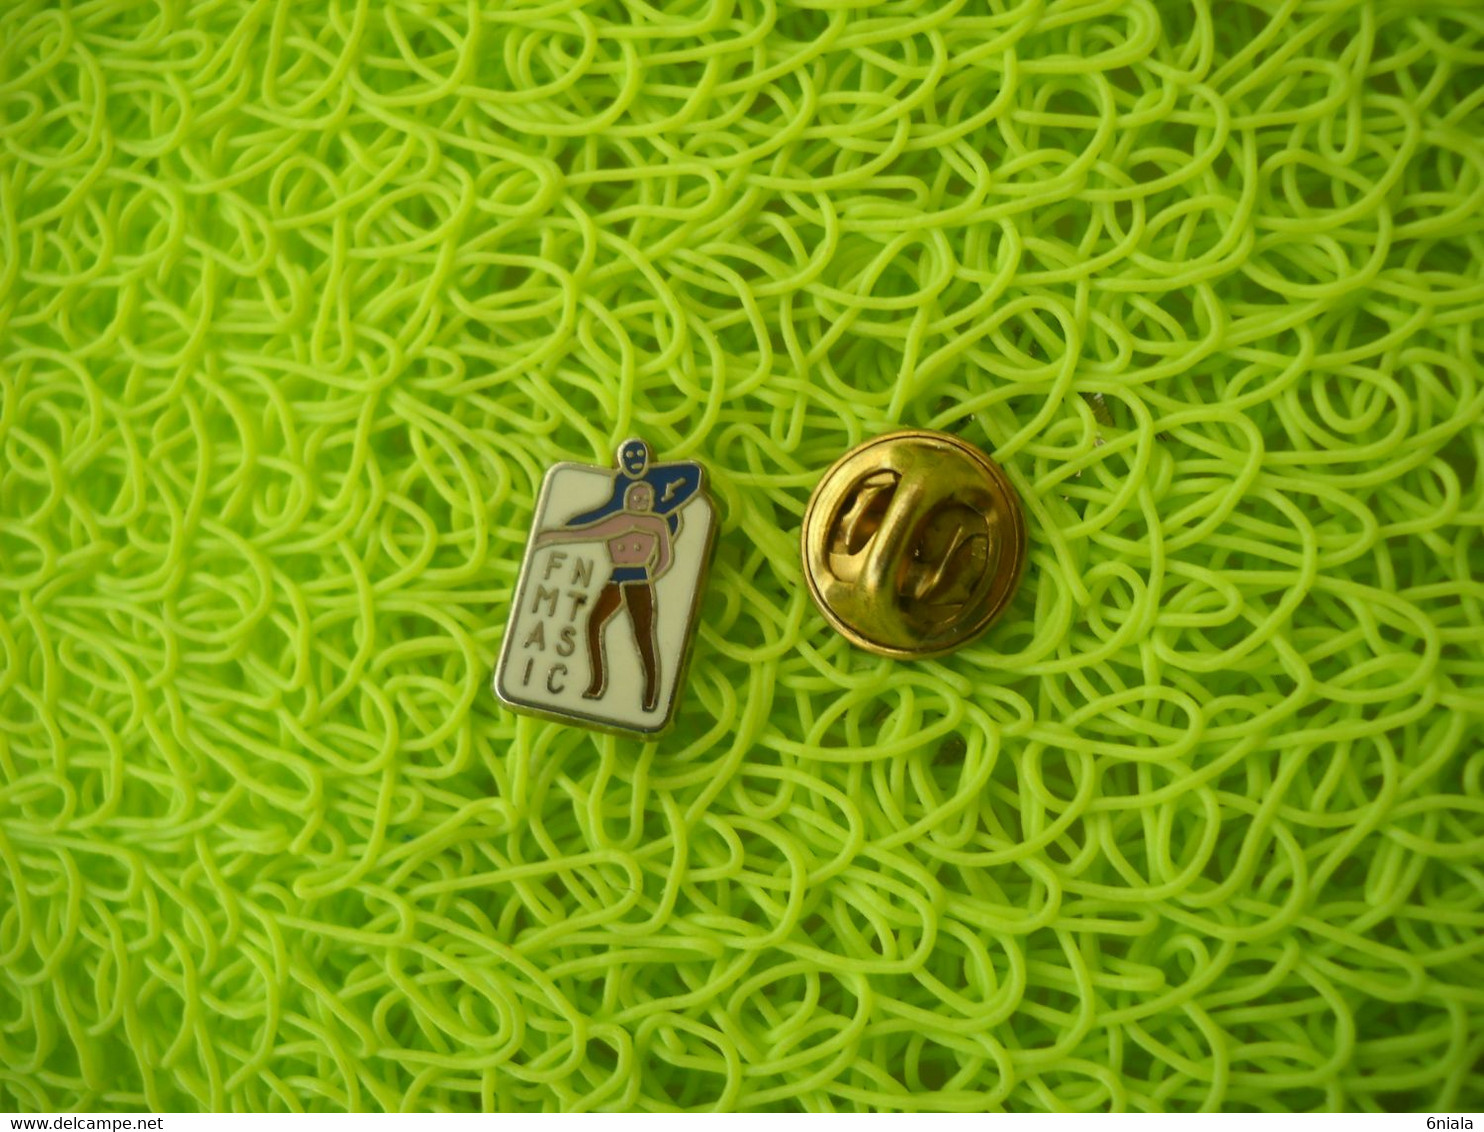 2052  PINS  Pin's     FNMTASIC  FN MT ASIC  Patinage Artistique  Couple - Skating (Figure)